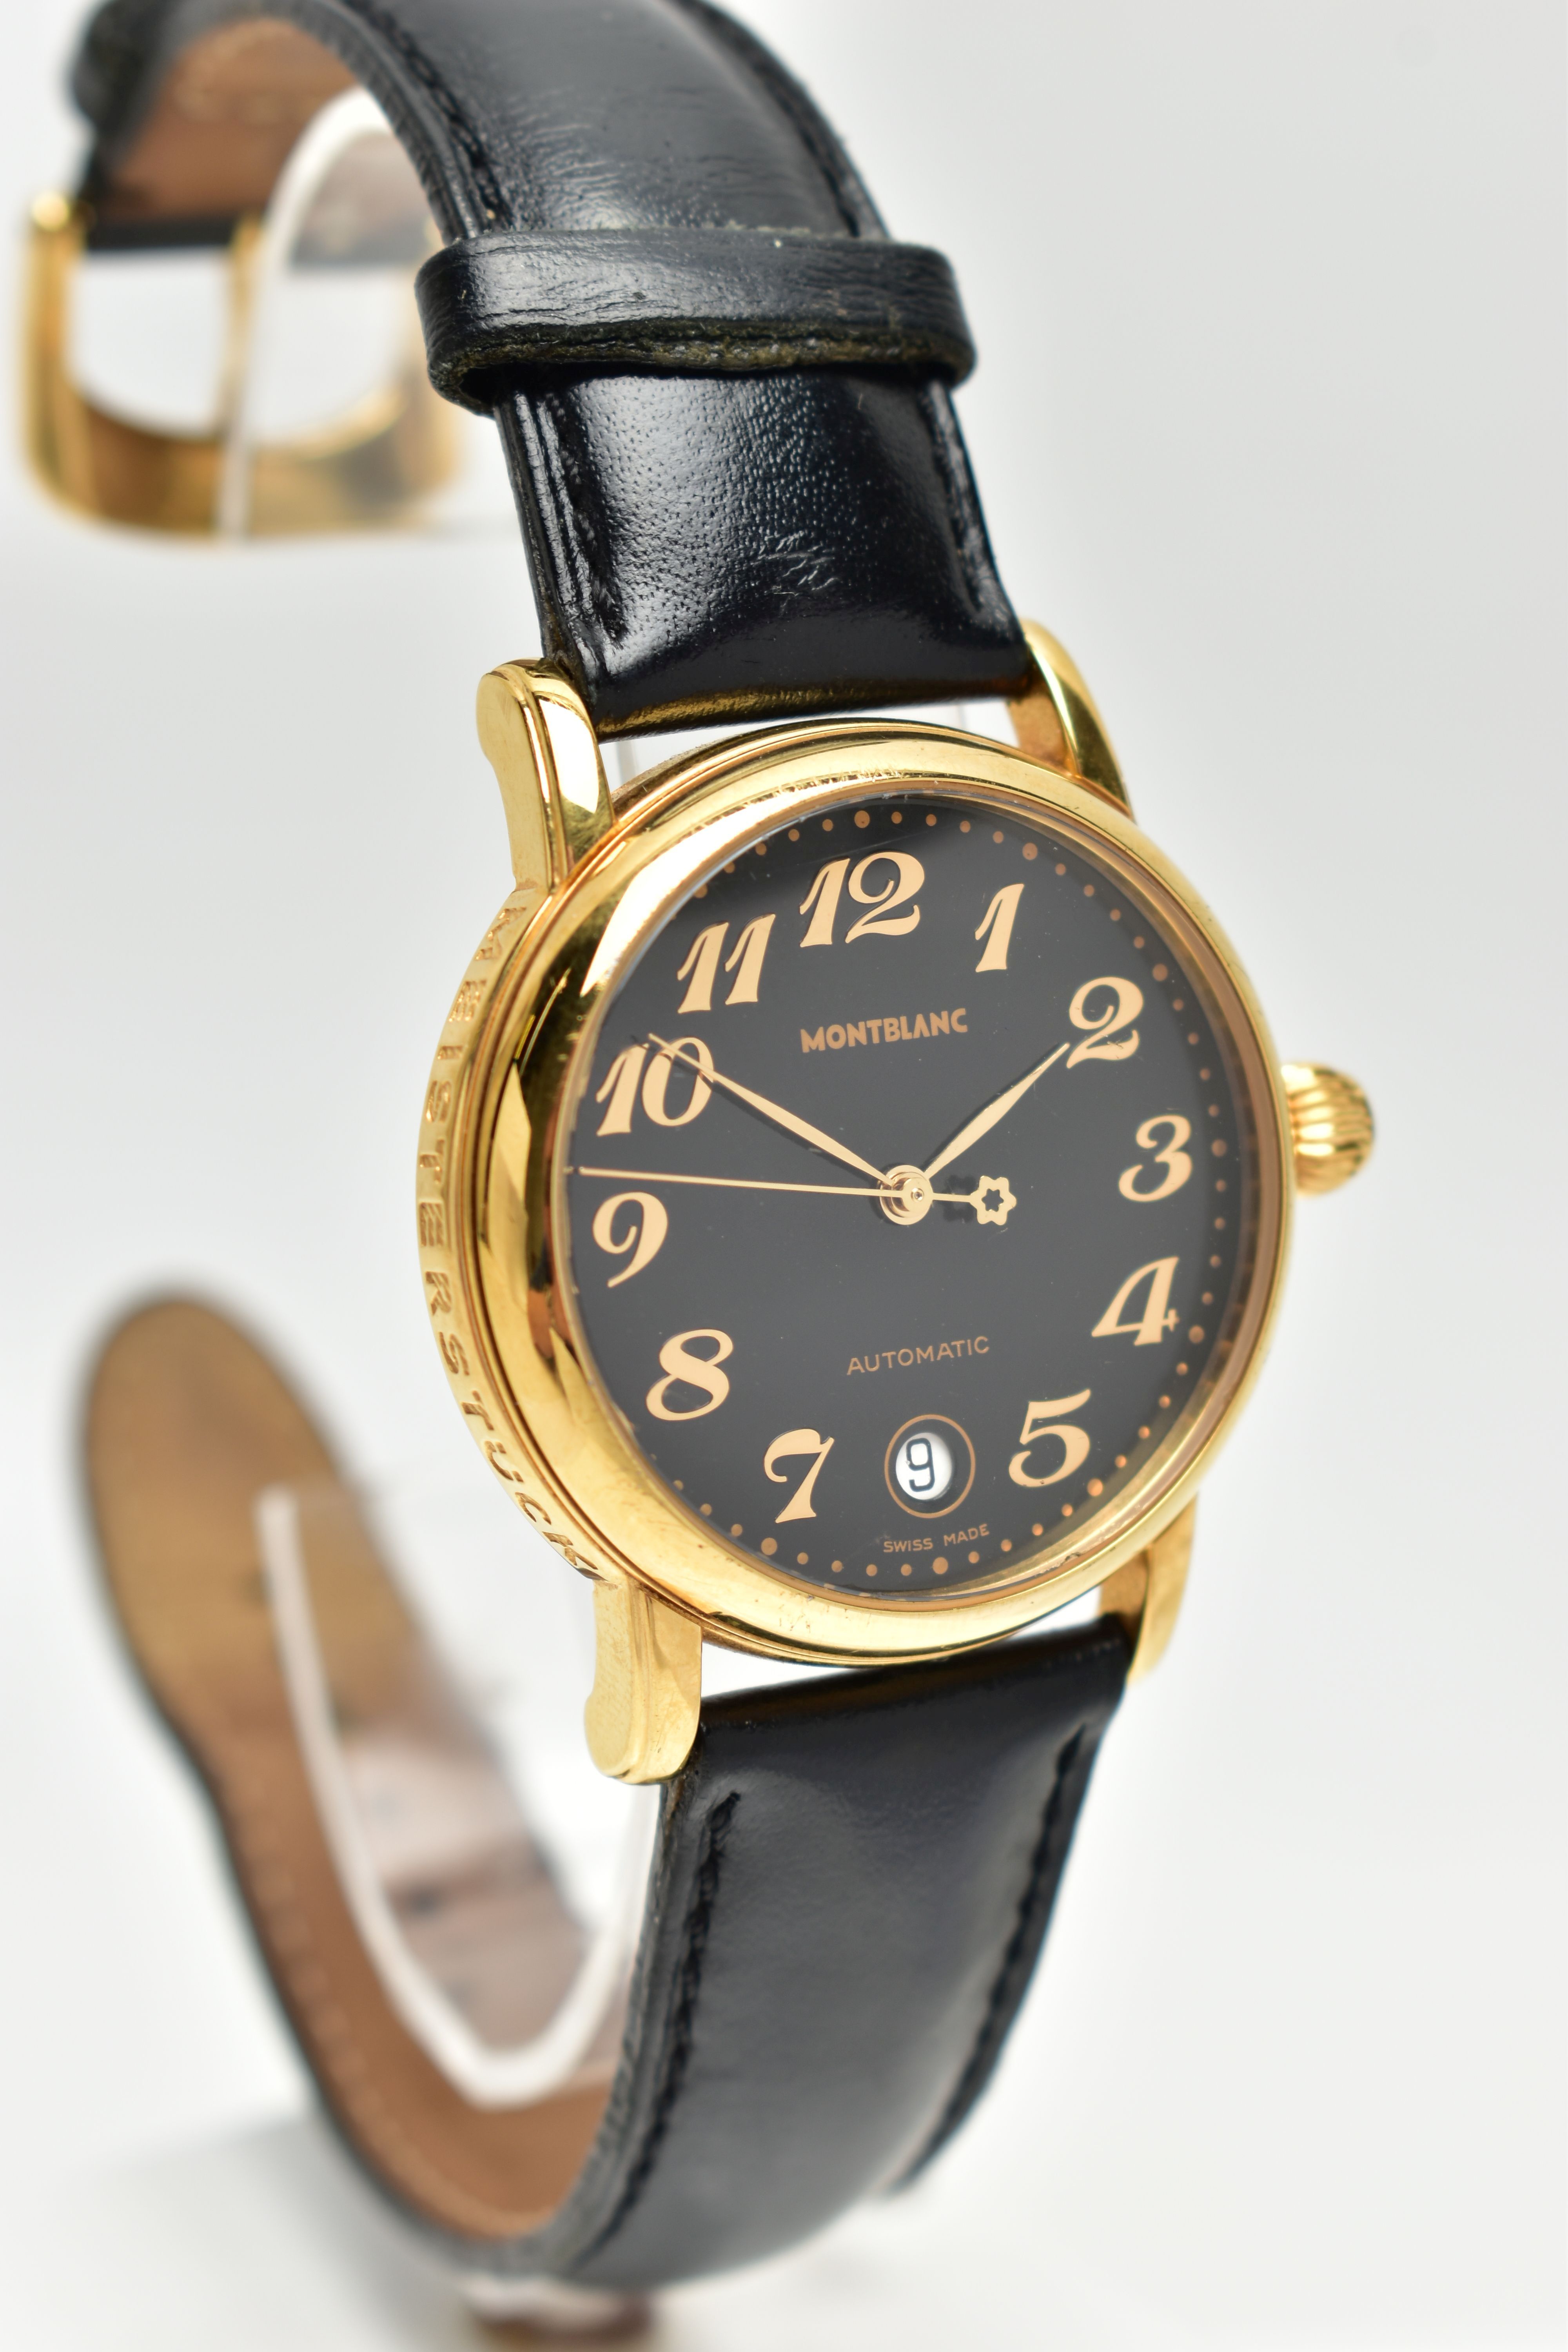 A GENTS 'MONTBLANC' WRISTWATCH, Automatic, round black dial signed 'Montblanc, Automatic', Arabic - Image 2 of 7